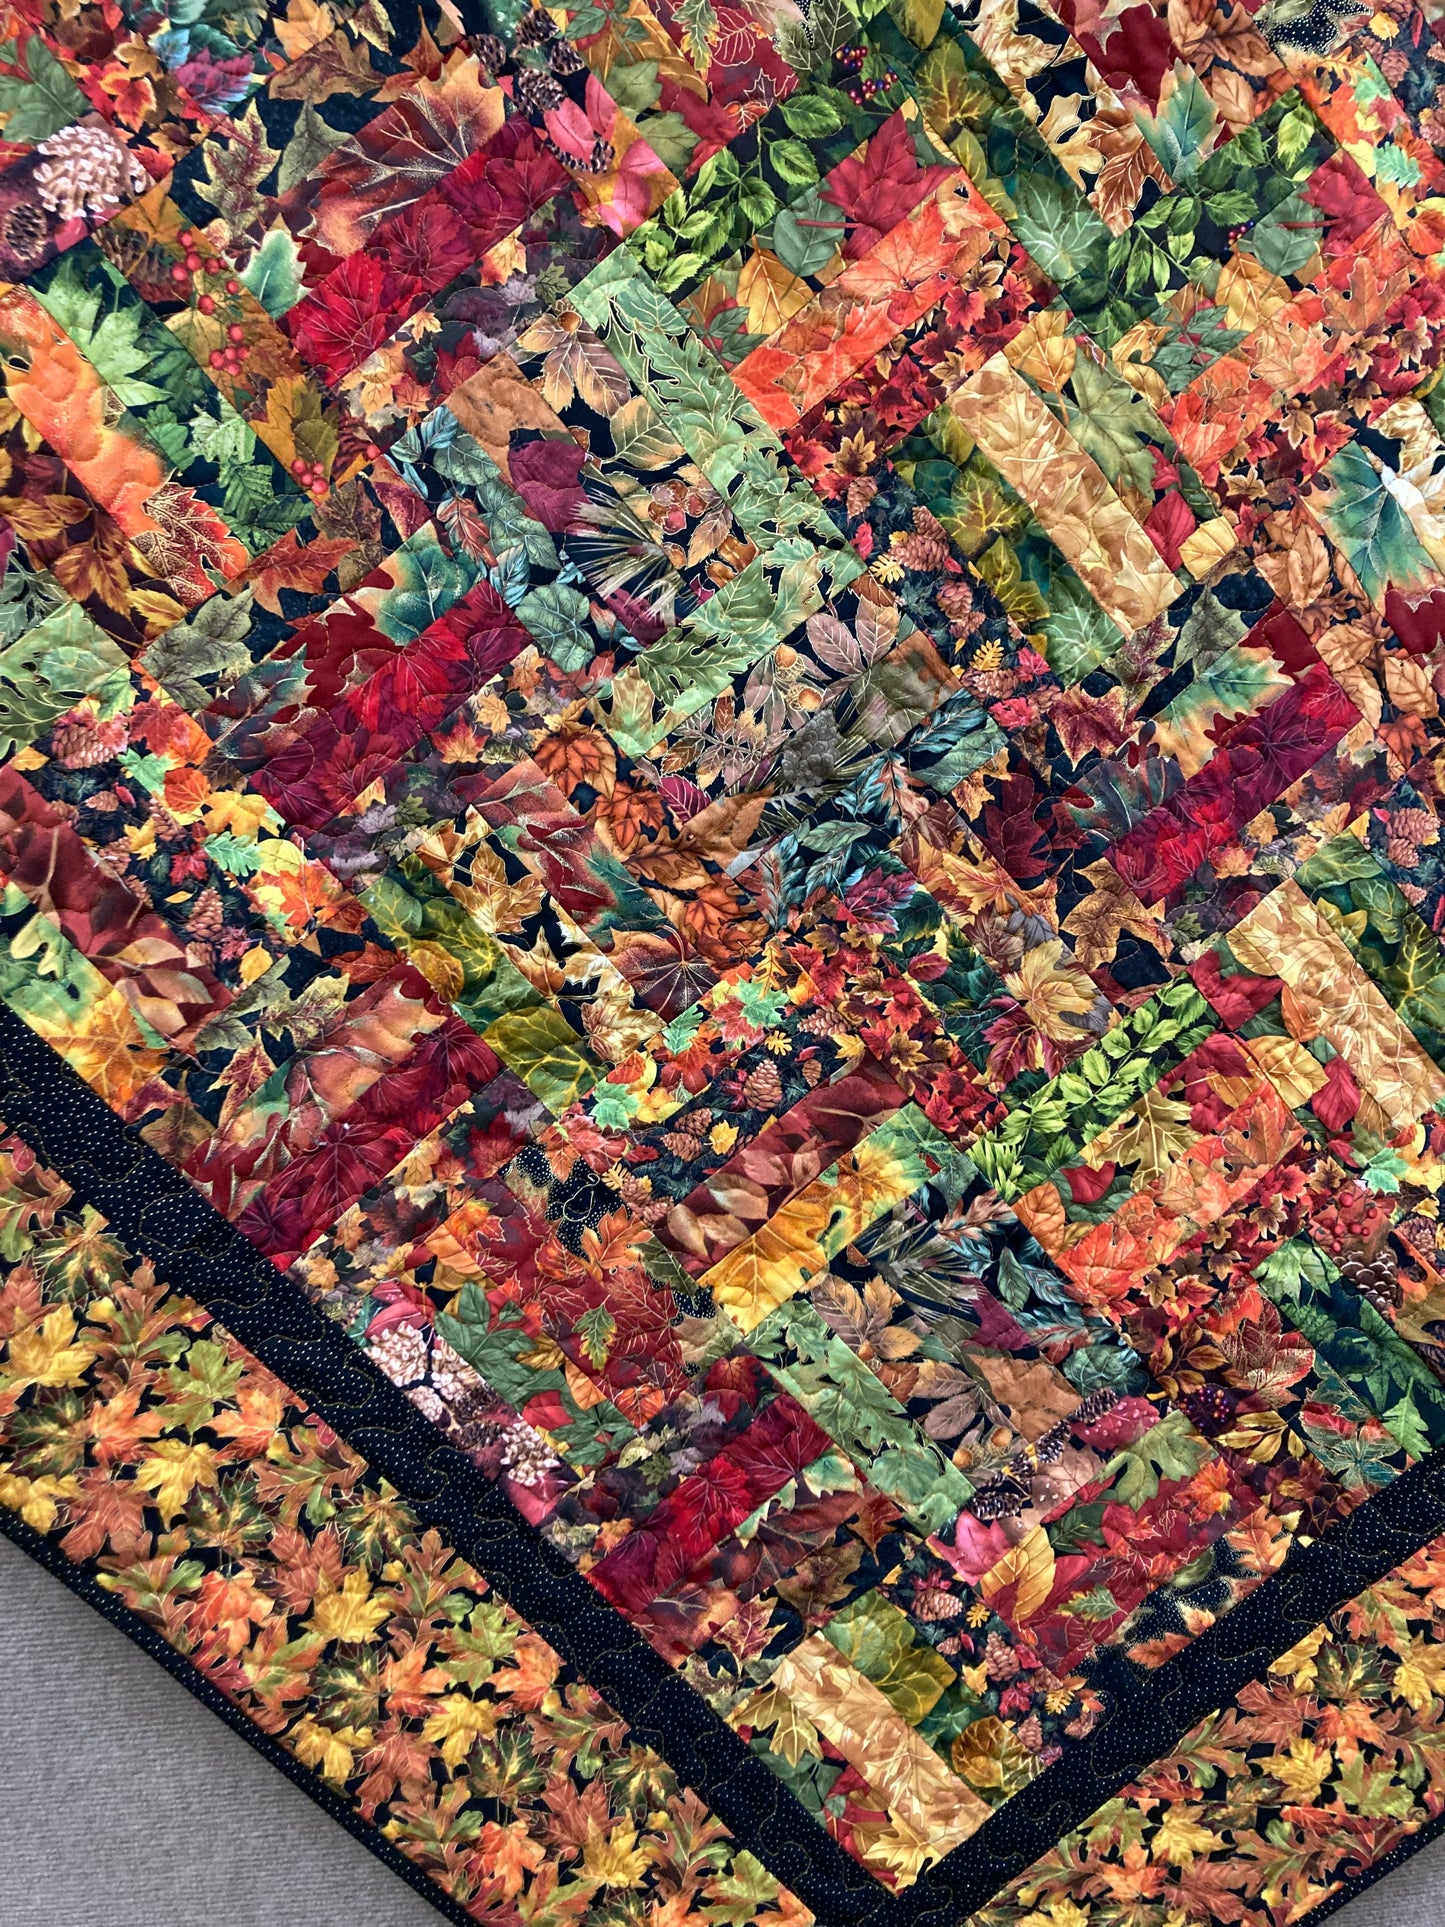 Fall Autumn Leaves Lap Quilt Sofa Throw, Vibrant Gold, Red, Green Leaves, 56x56", Couch Bed, Warm Cotton, Earth Tones Mountain Cabin Lodge